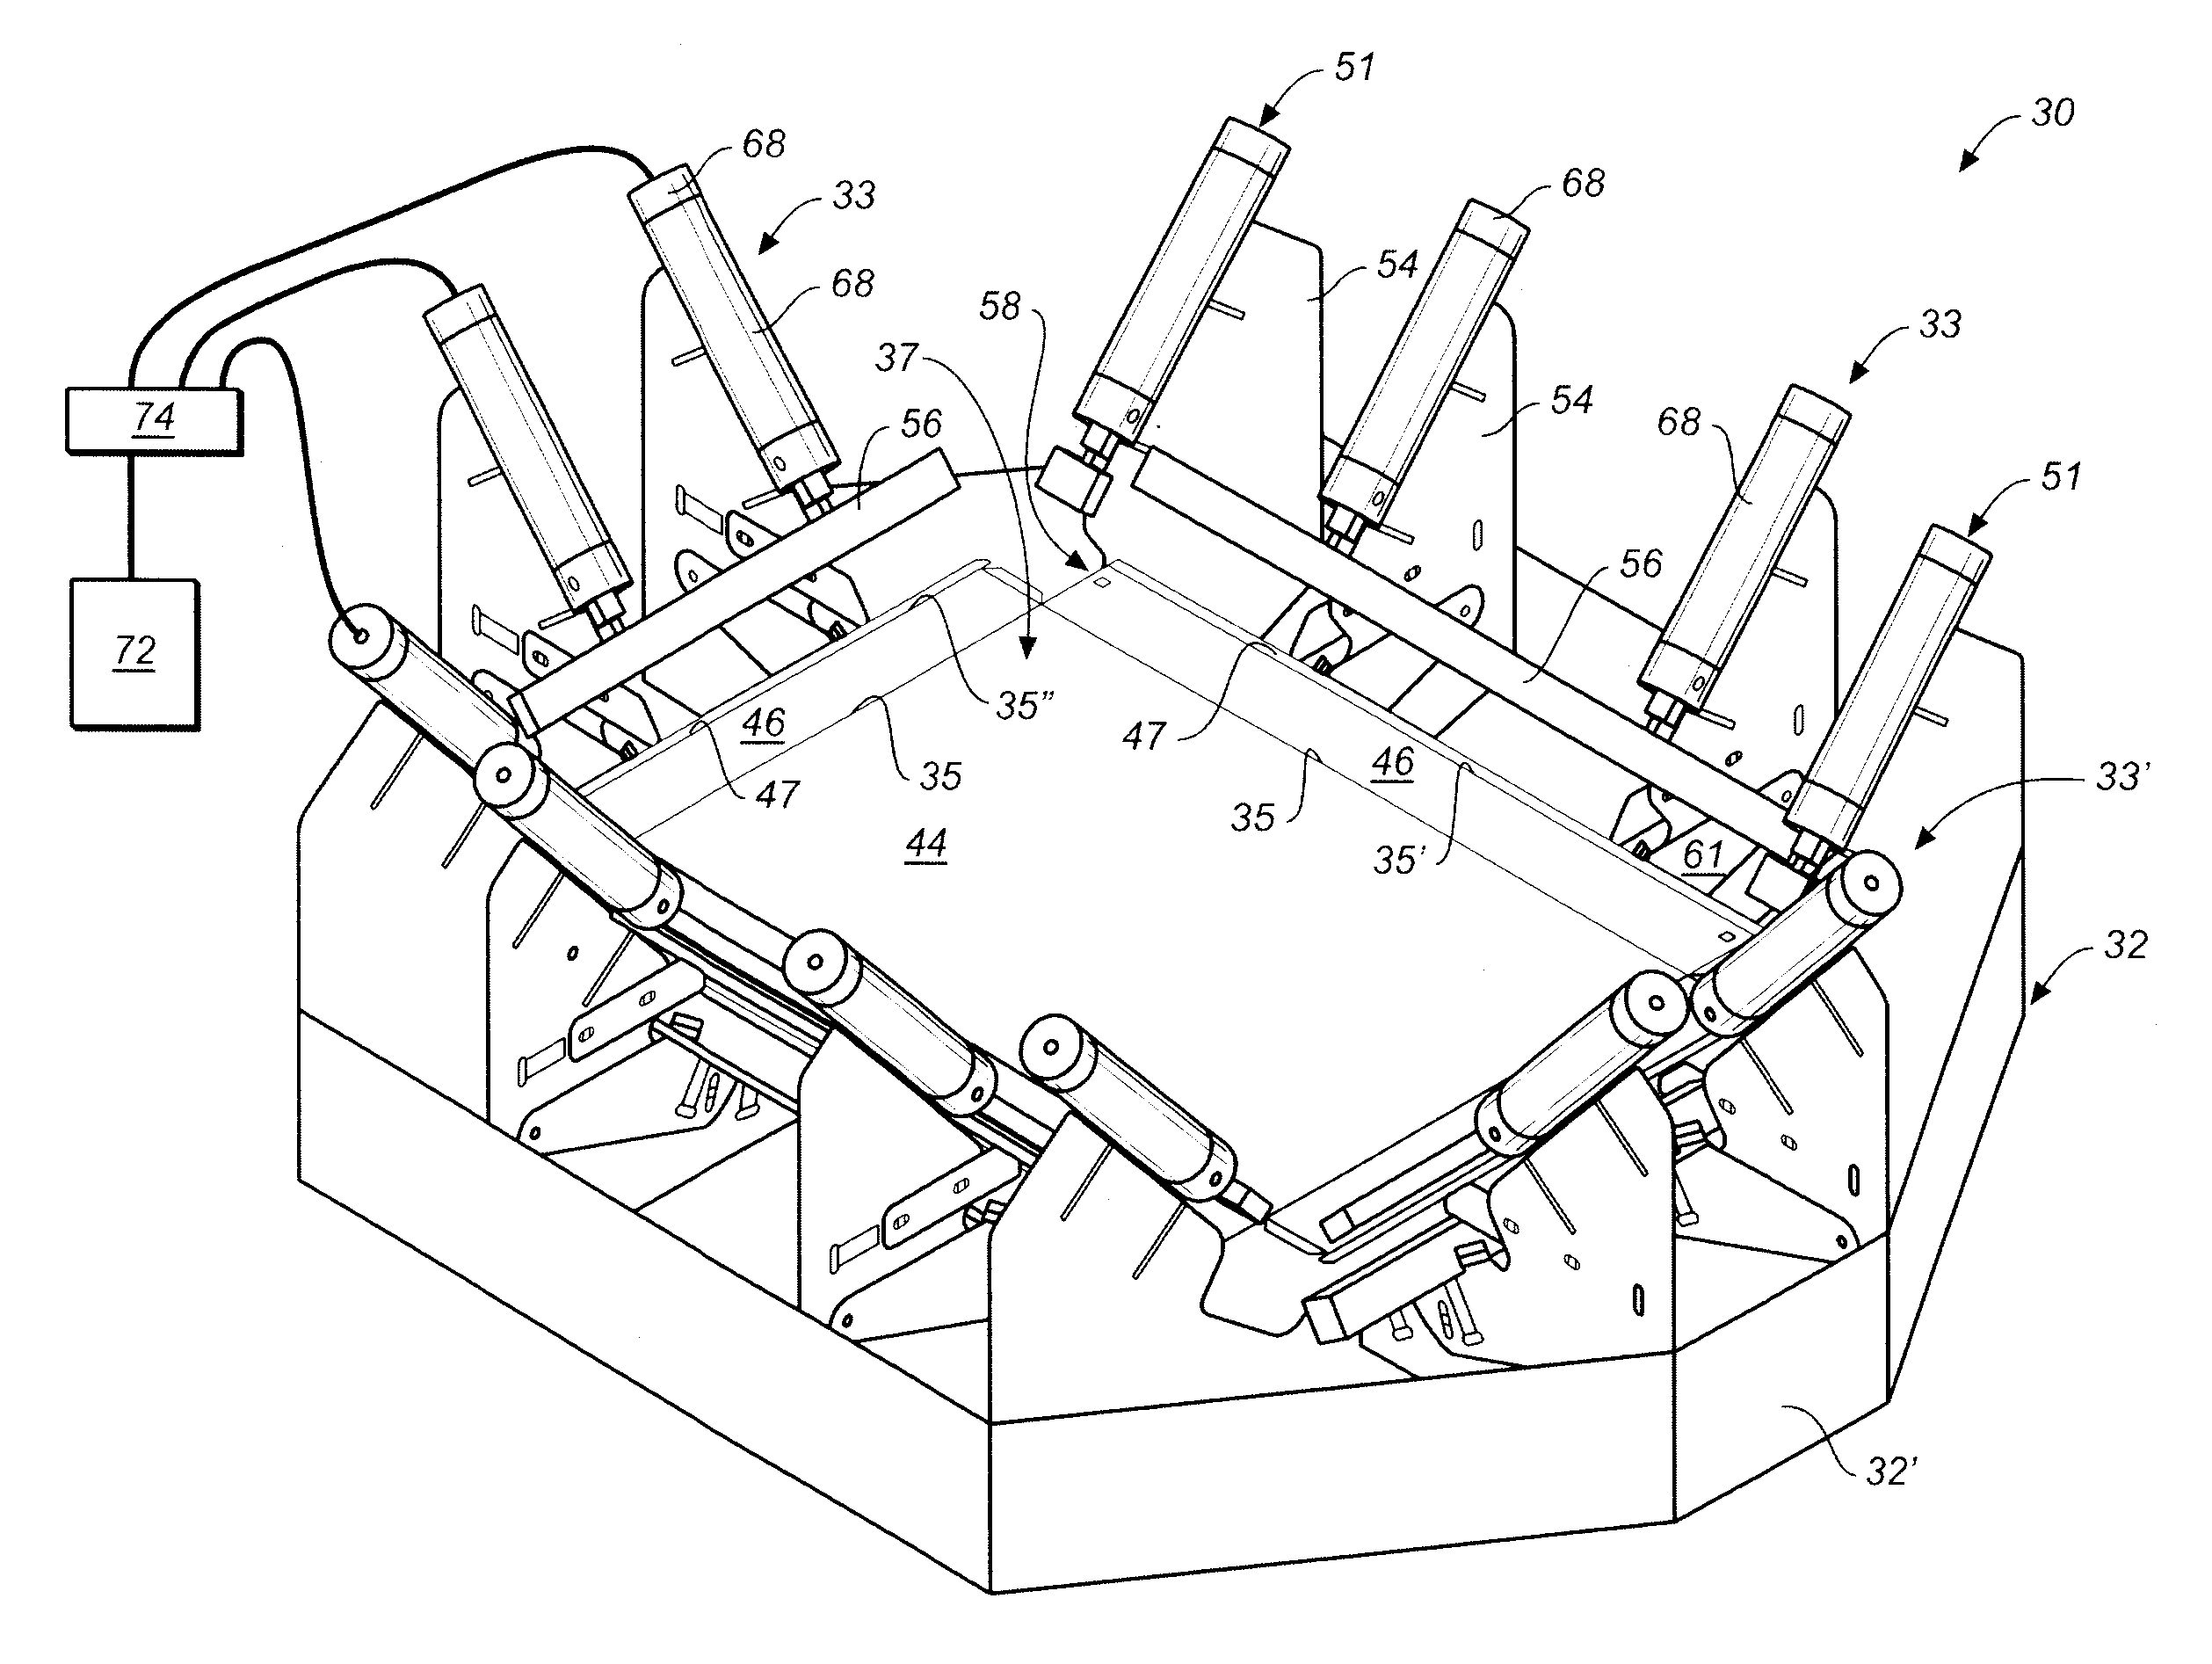 Method and Apparatus For Imparting Compound Folds on Sheet Material